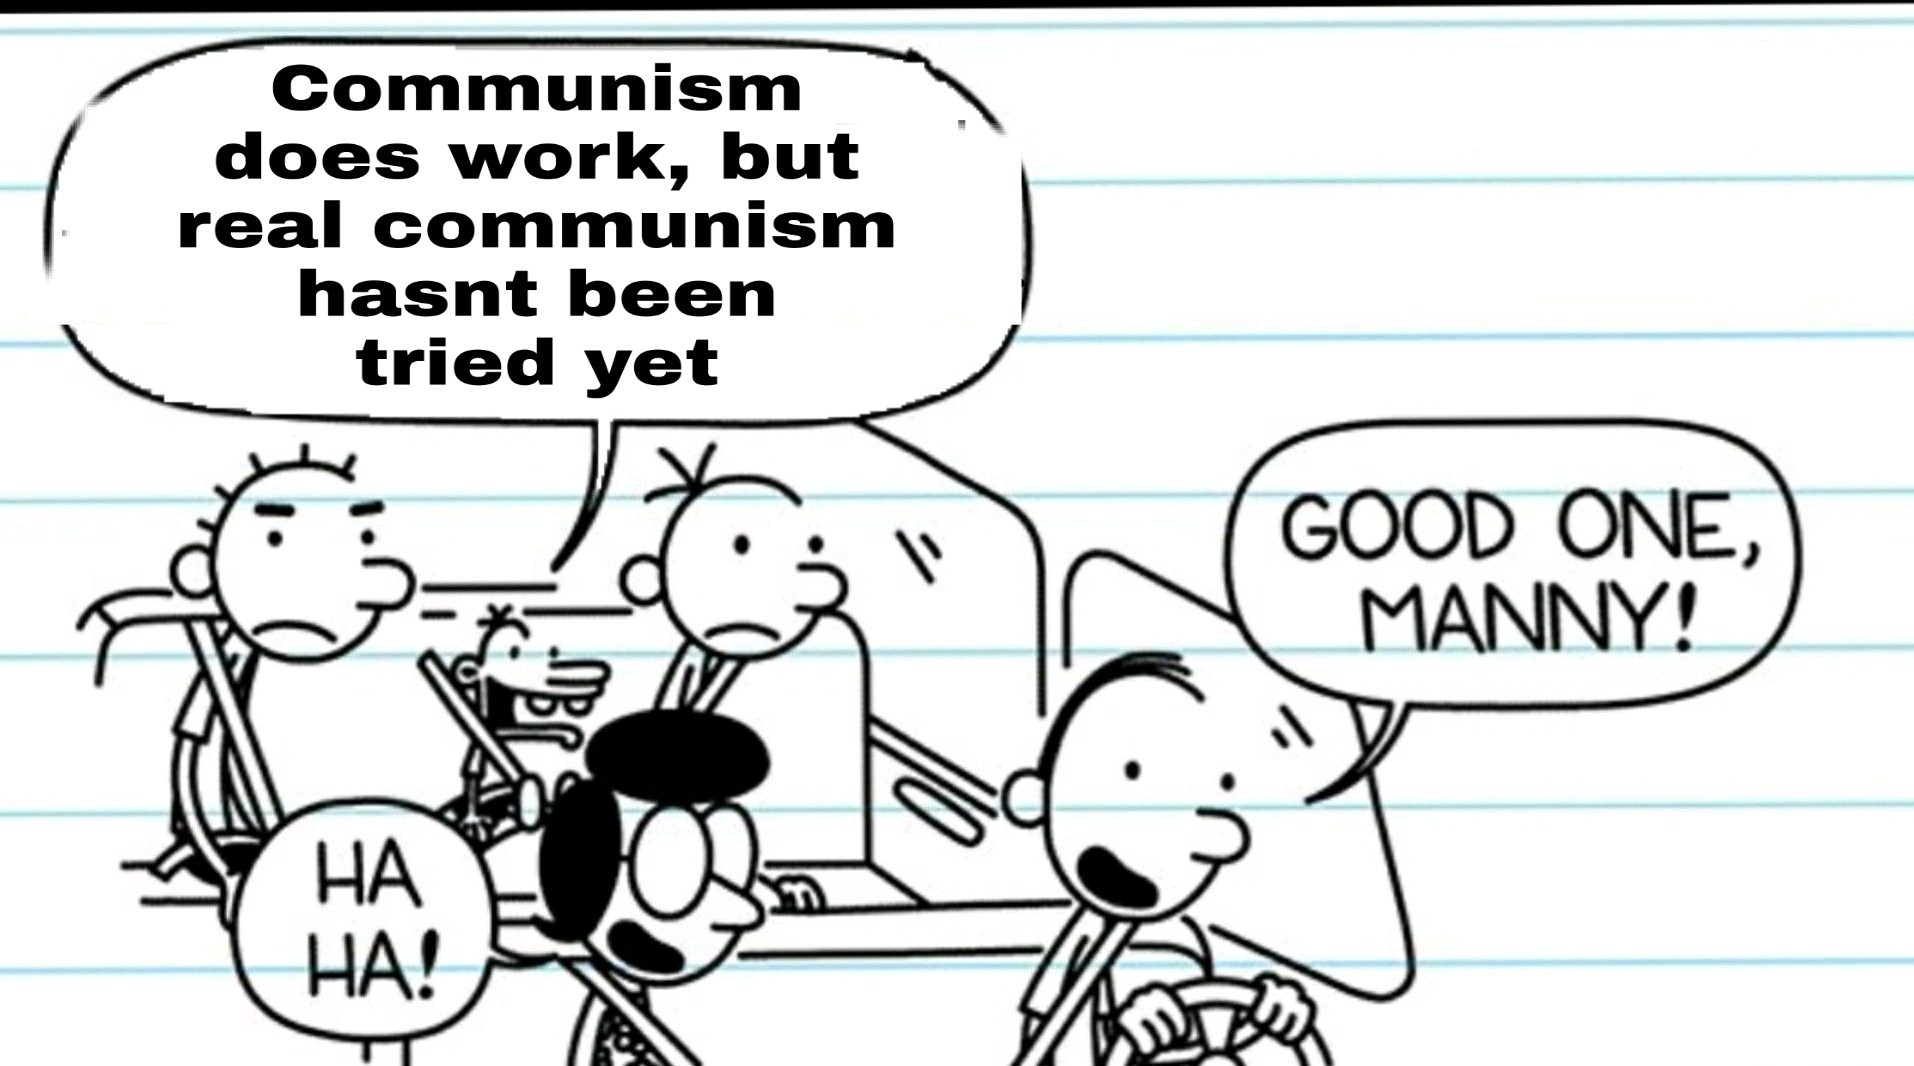 Silly commies - meme